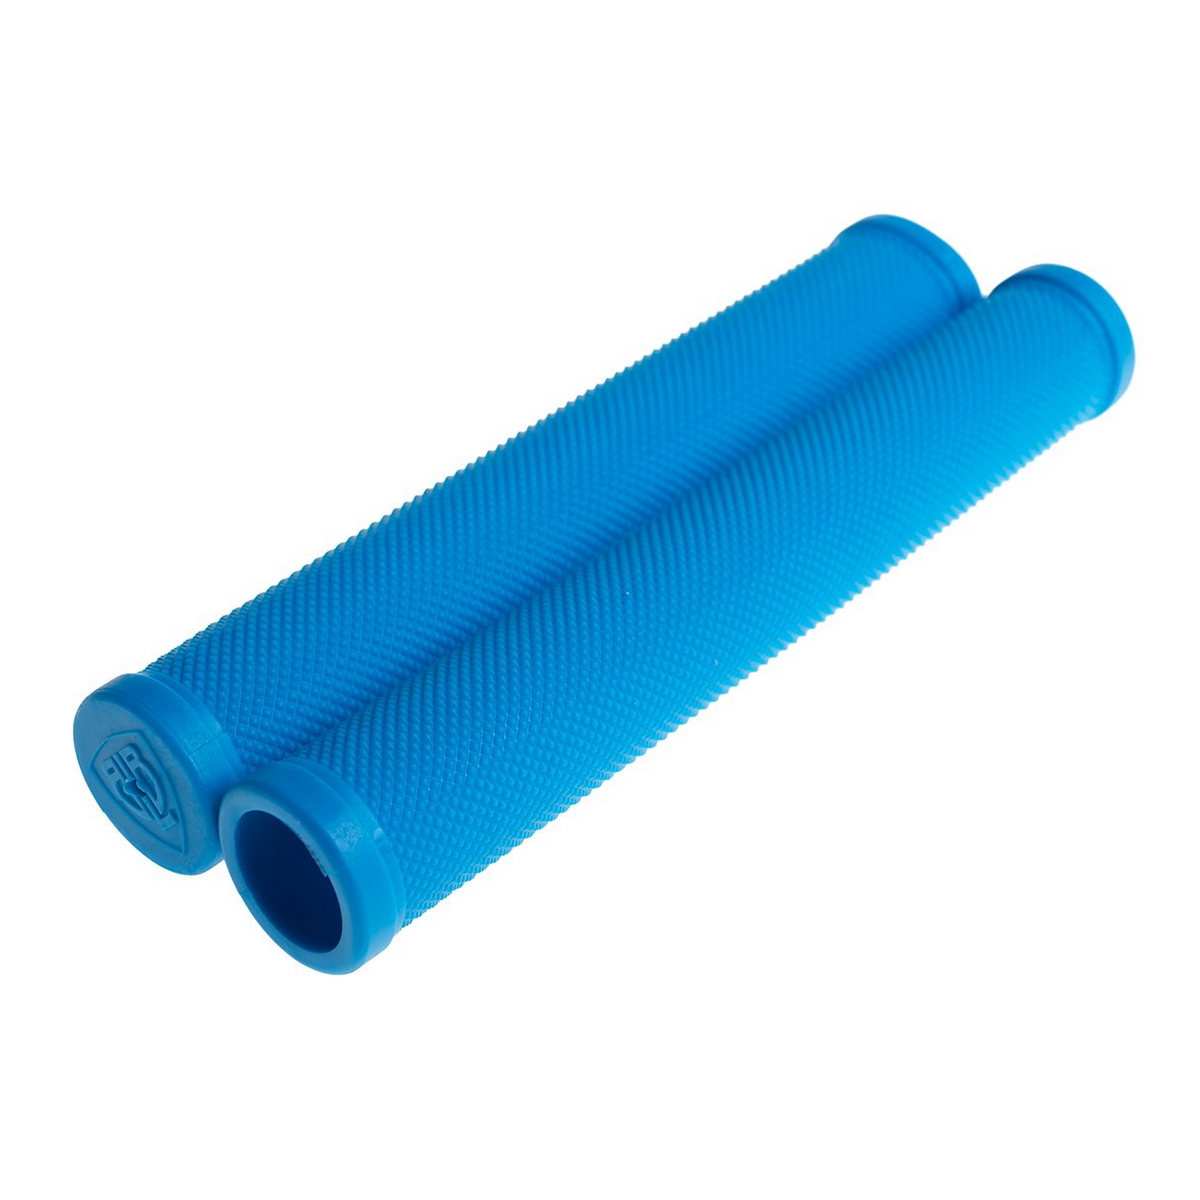 Pair chewy grips blue